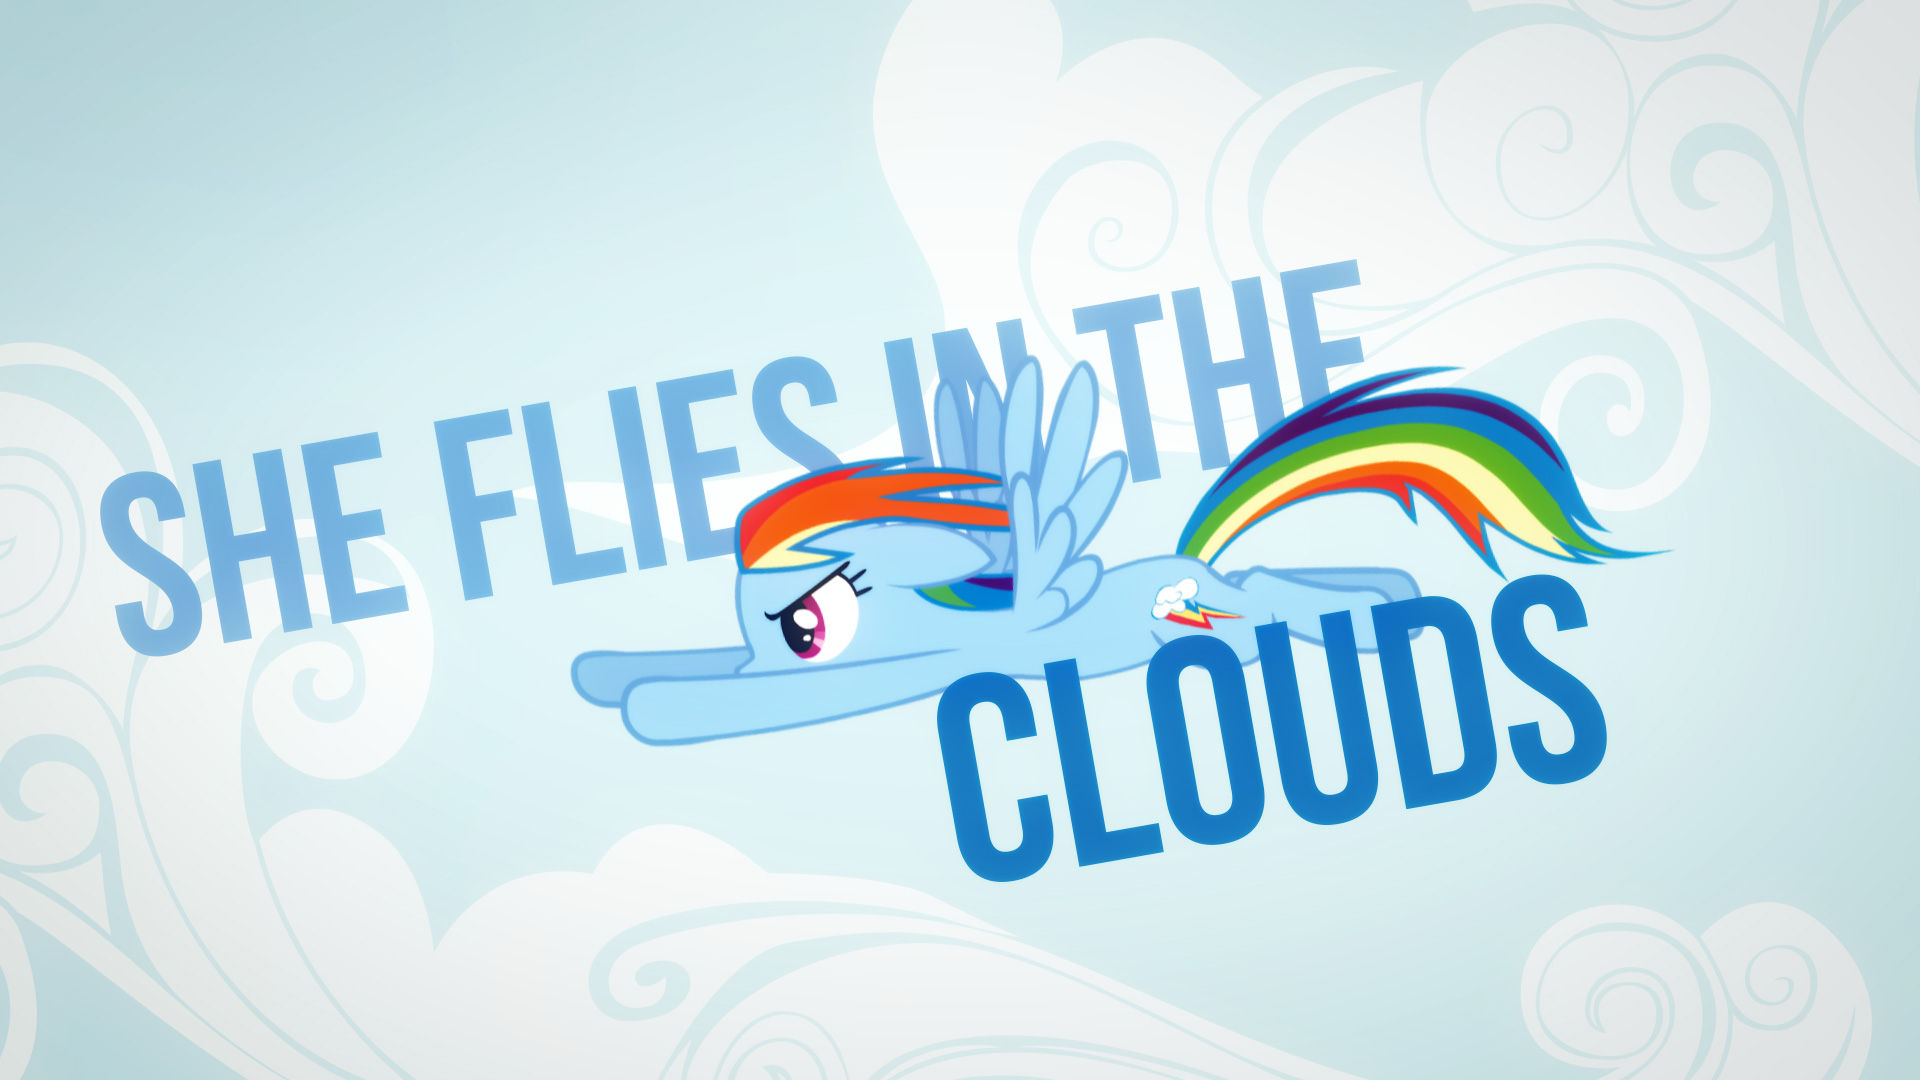 She likes clouds Wallpaper 1 by DabuPL